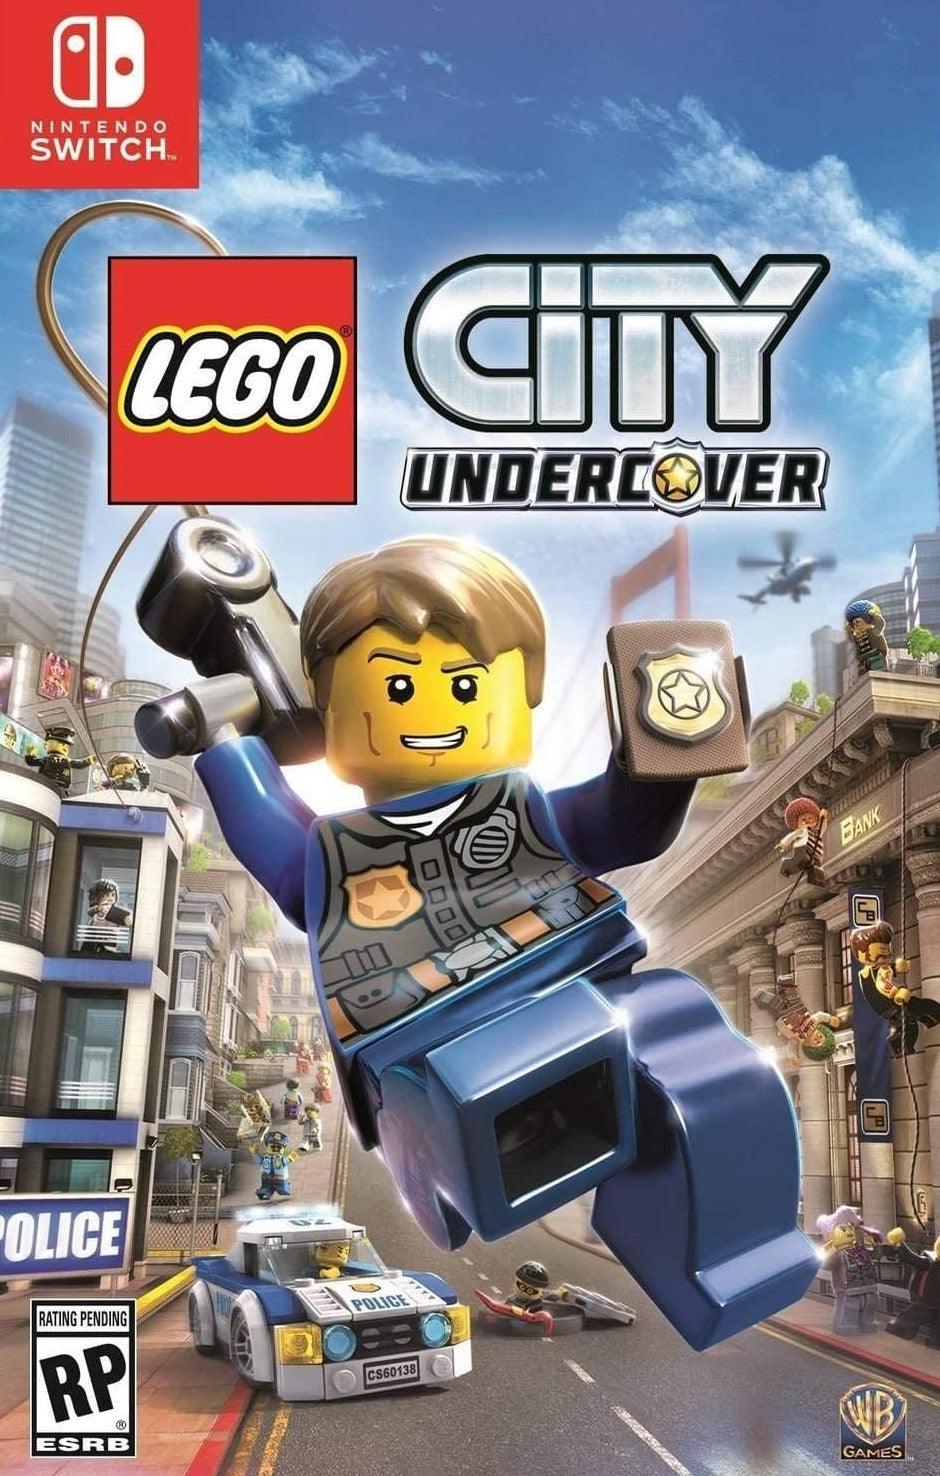 Lego City Undercover (Cartridge Version) - Nintendo Switch - GD Games 